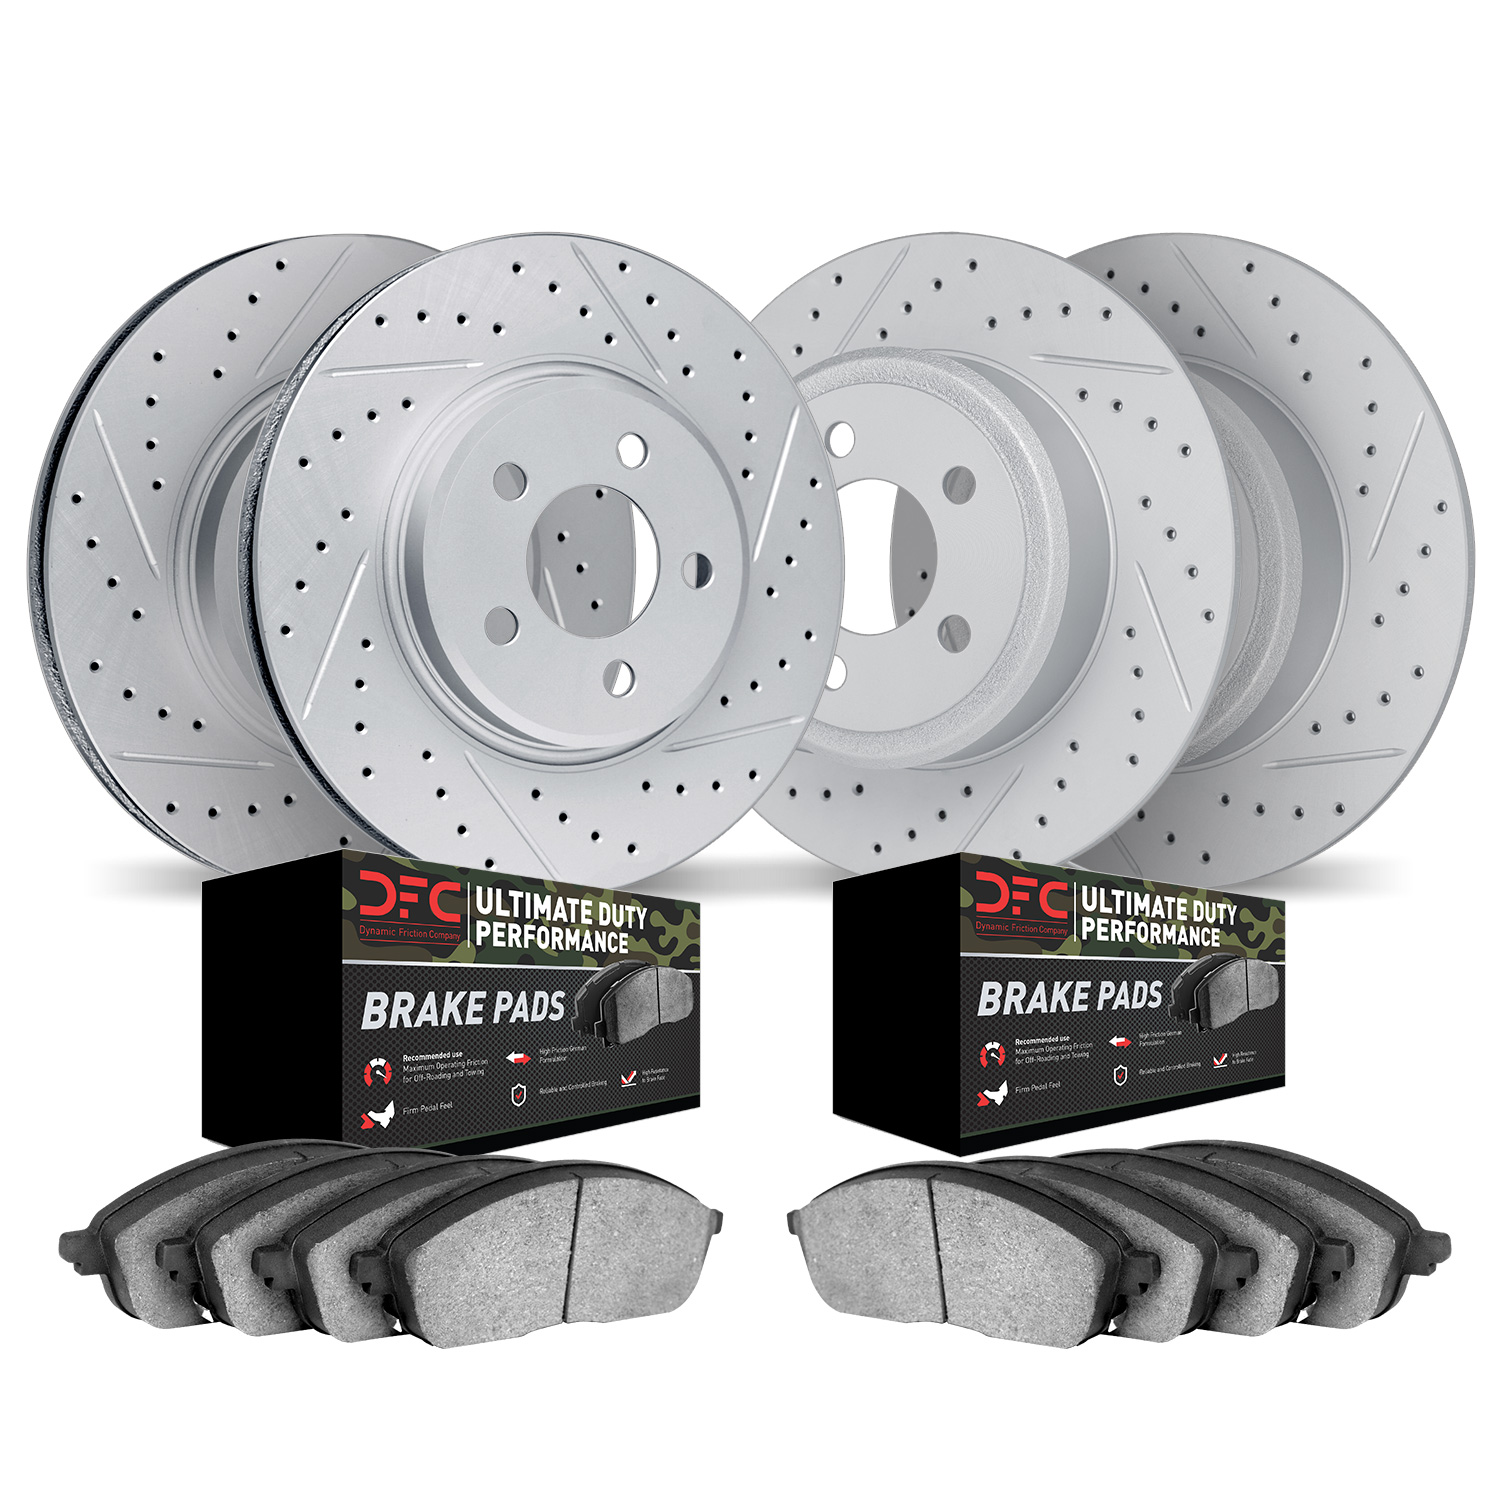 2404-54003 Geoperformance Drilled/Slotted Brake Rotors with Ultimate-Duty Brake Pads Kit, 2001-2002 Ford/Lincoln/Mercury/Mazda,